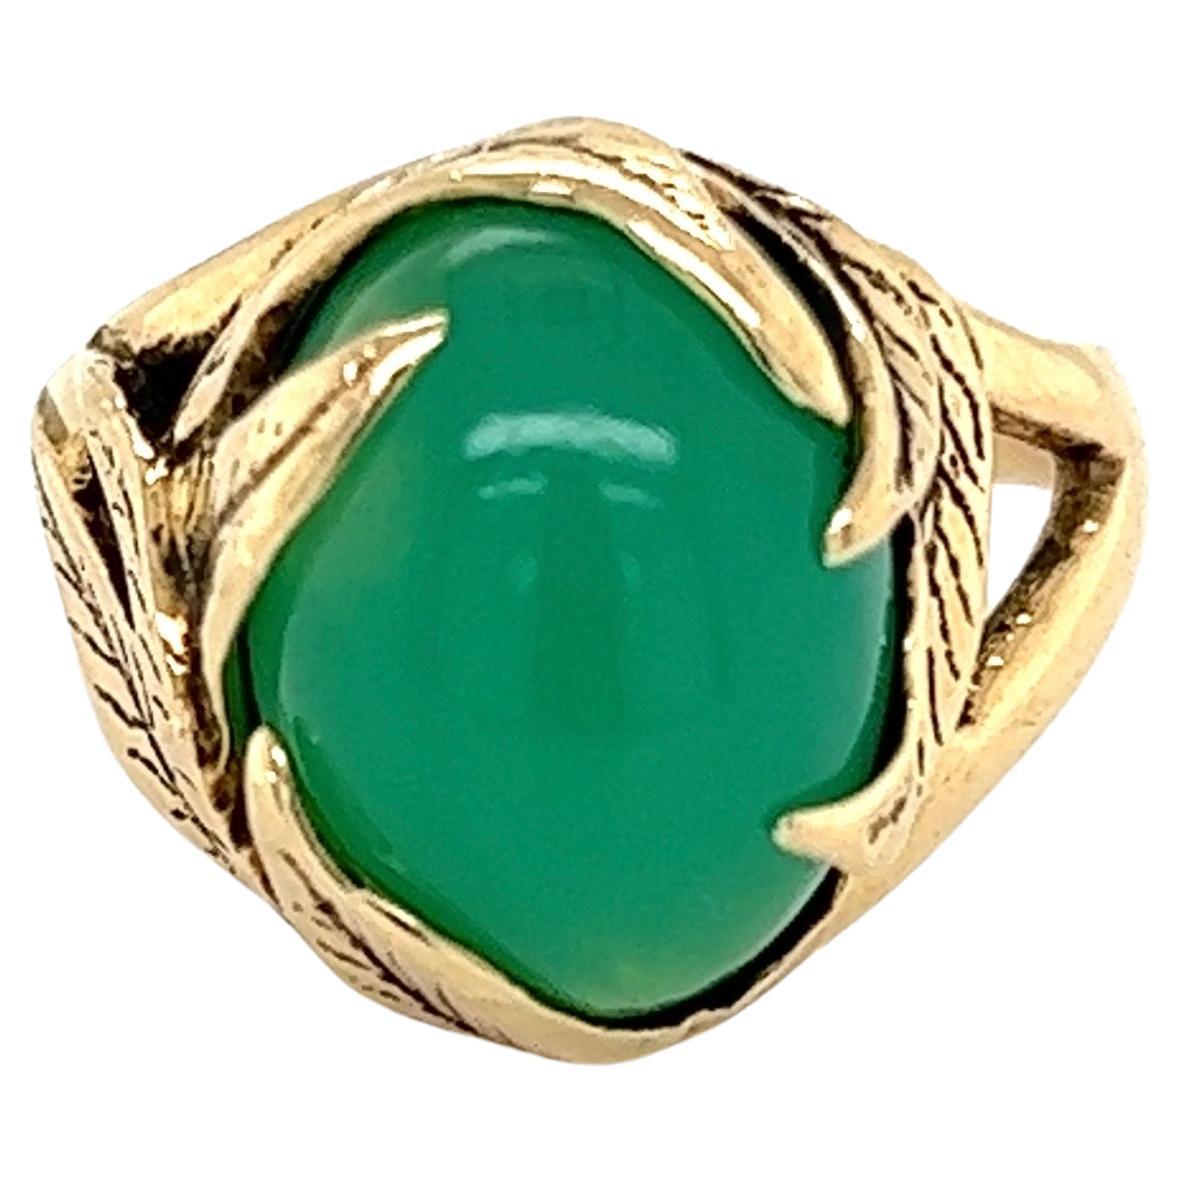 The Modernity Chrysoprase Vintage Solitaire Gold Cocktail Ring